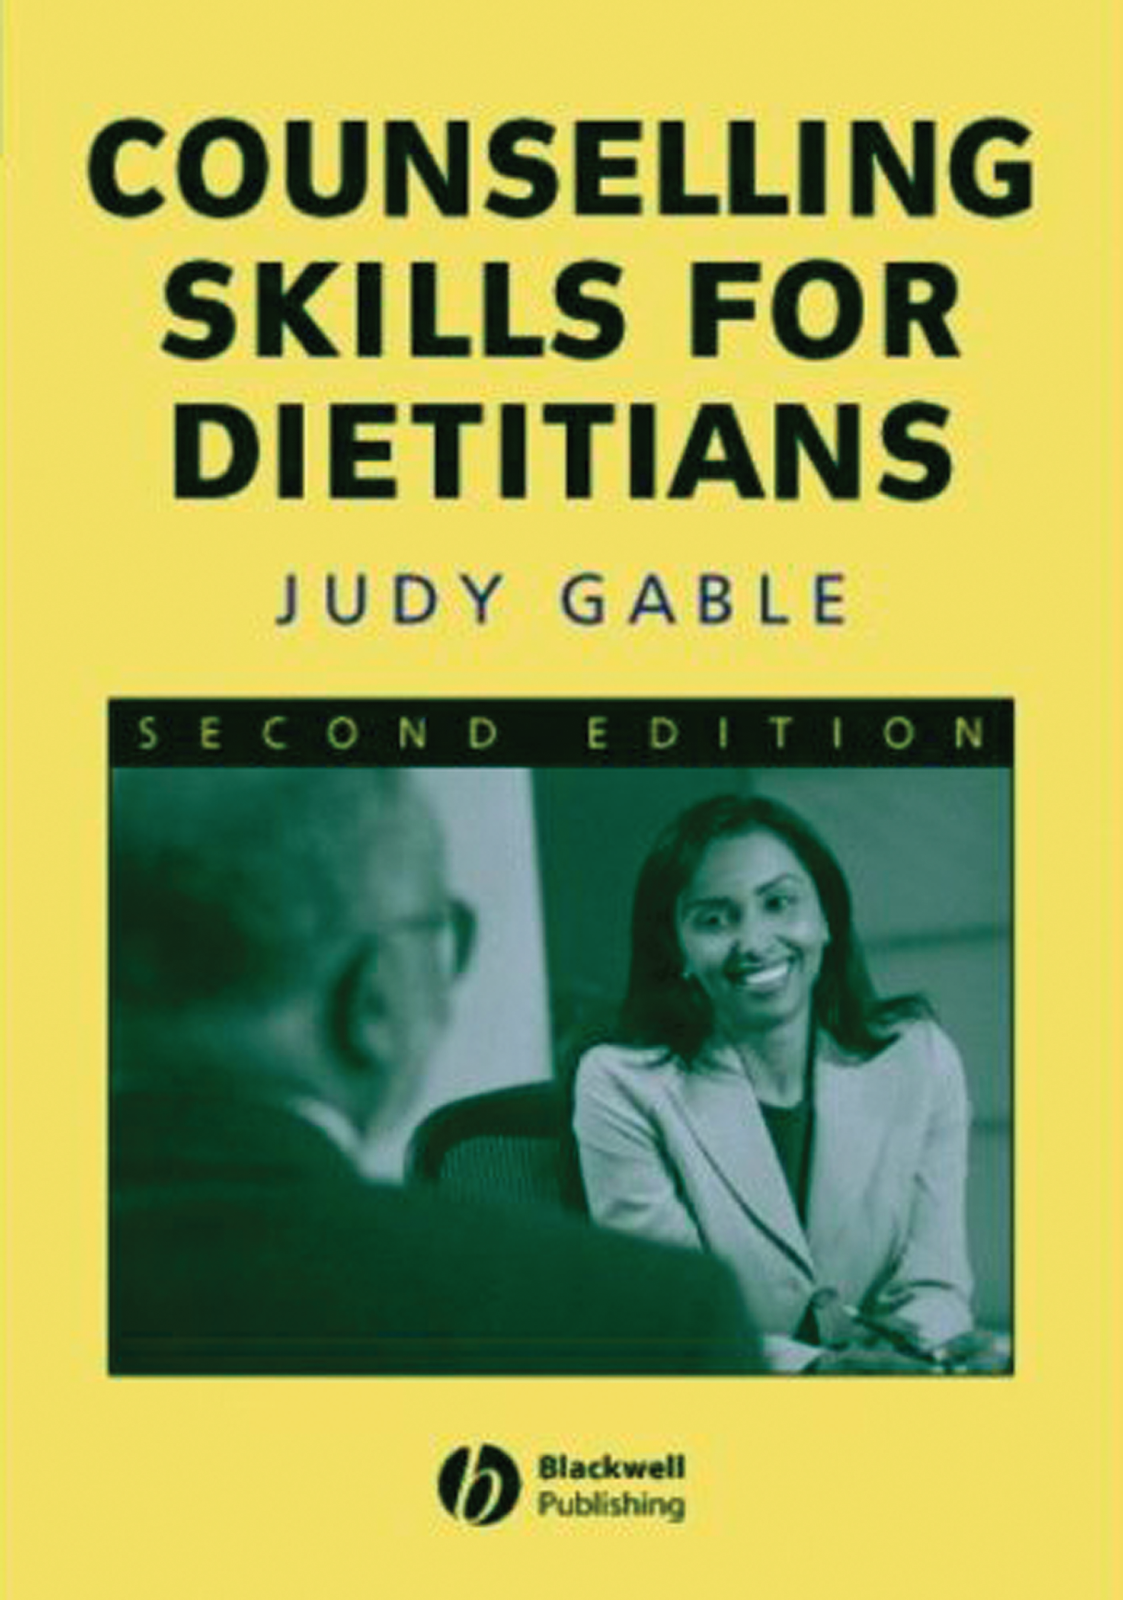 Free Ebook Download 1001tutorial.blogspot.com Counselling Skills for Dietitians